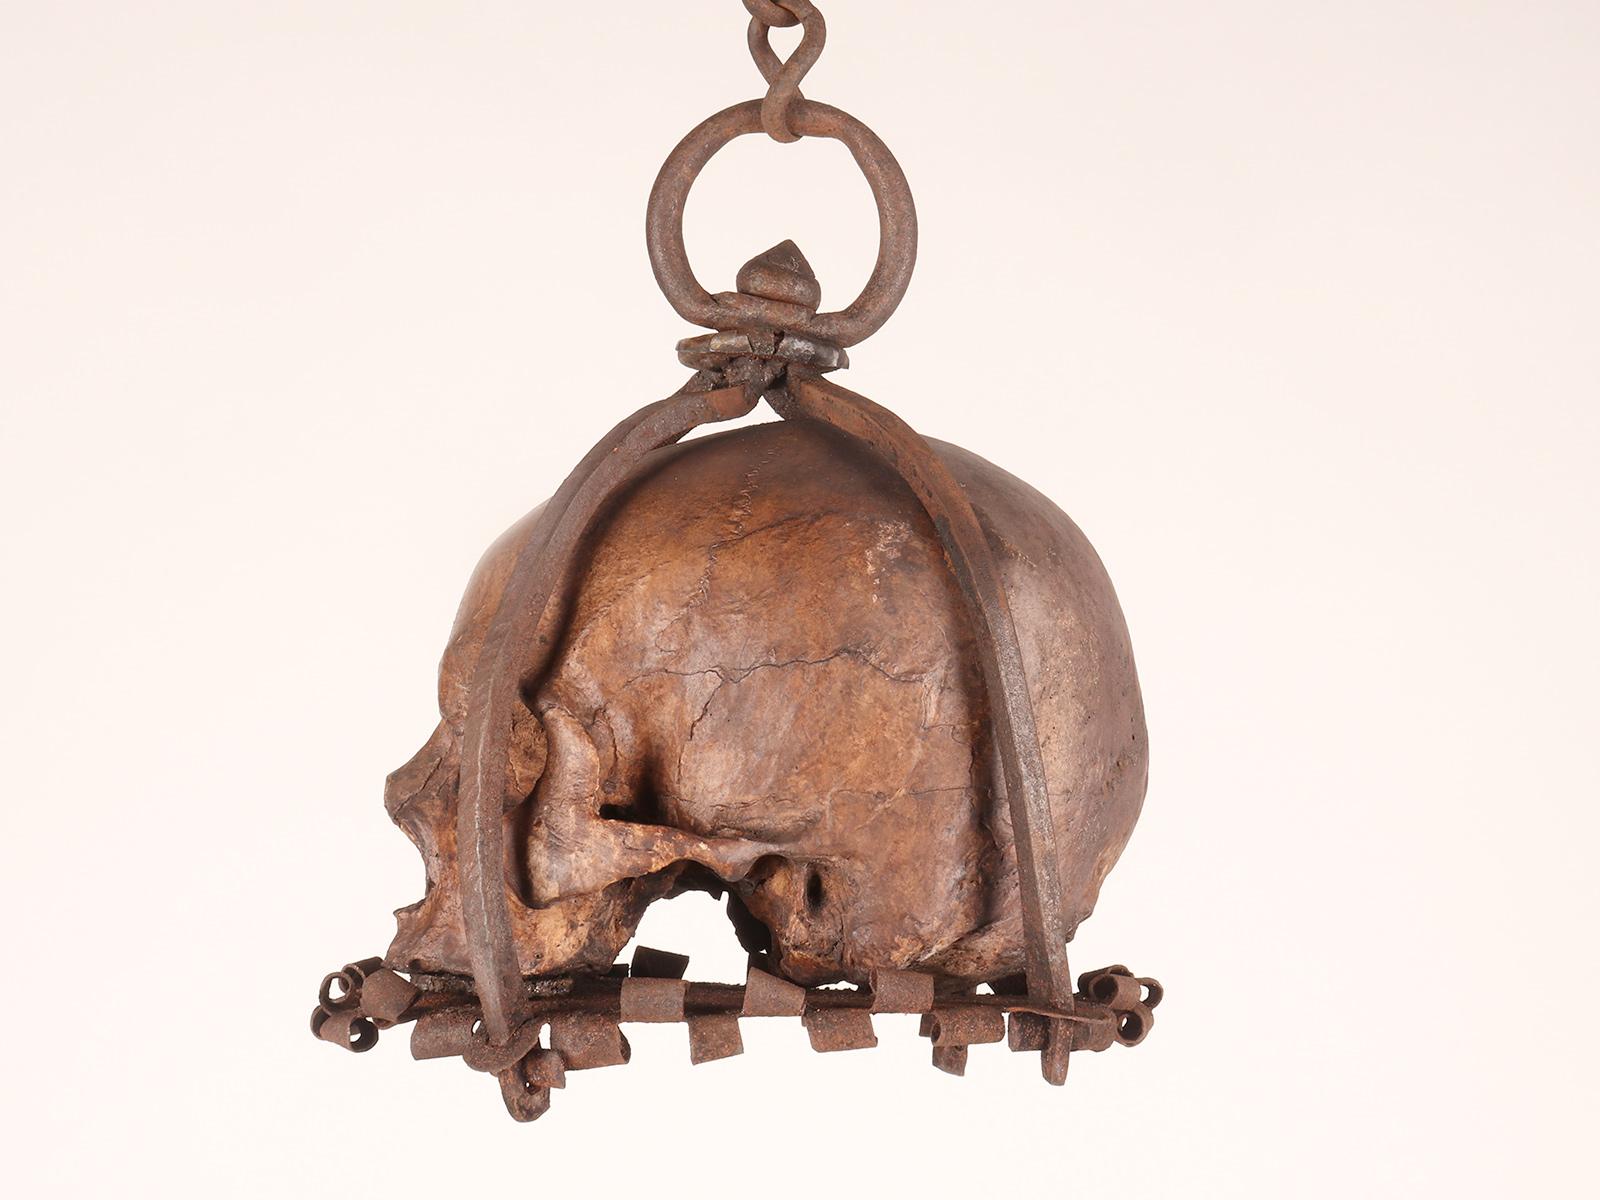 Iron Memento mori. A caged and suspended skull sculpture, Germany, late 17th century.